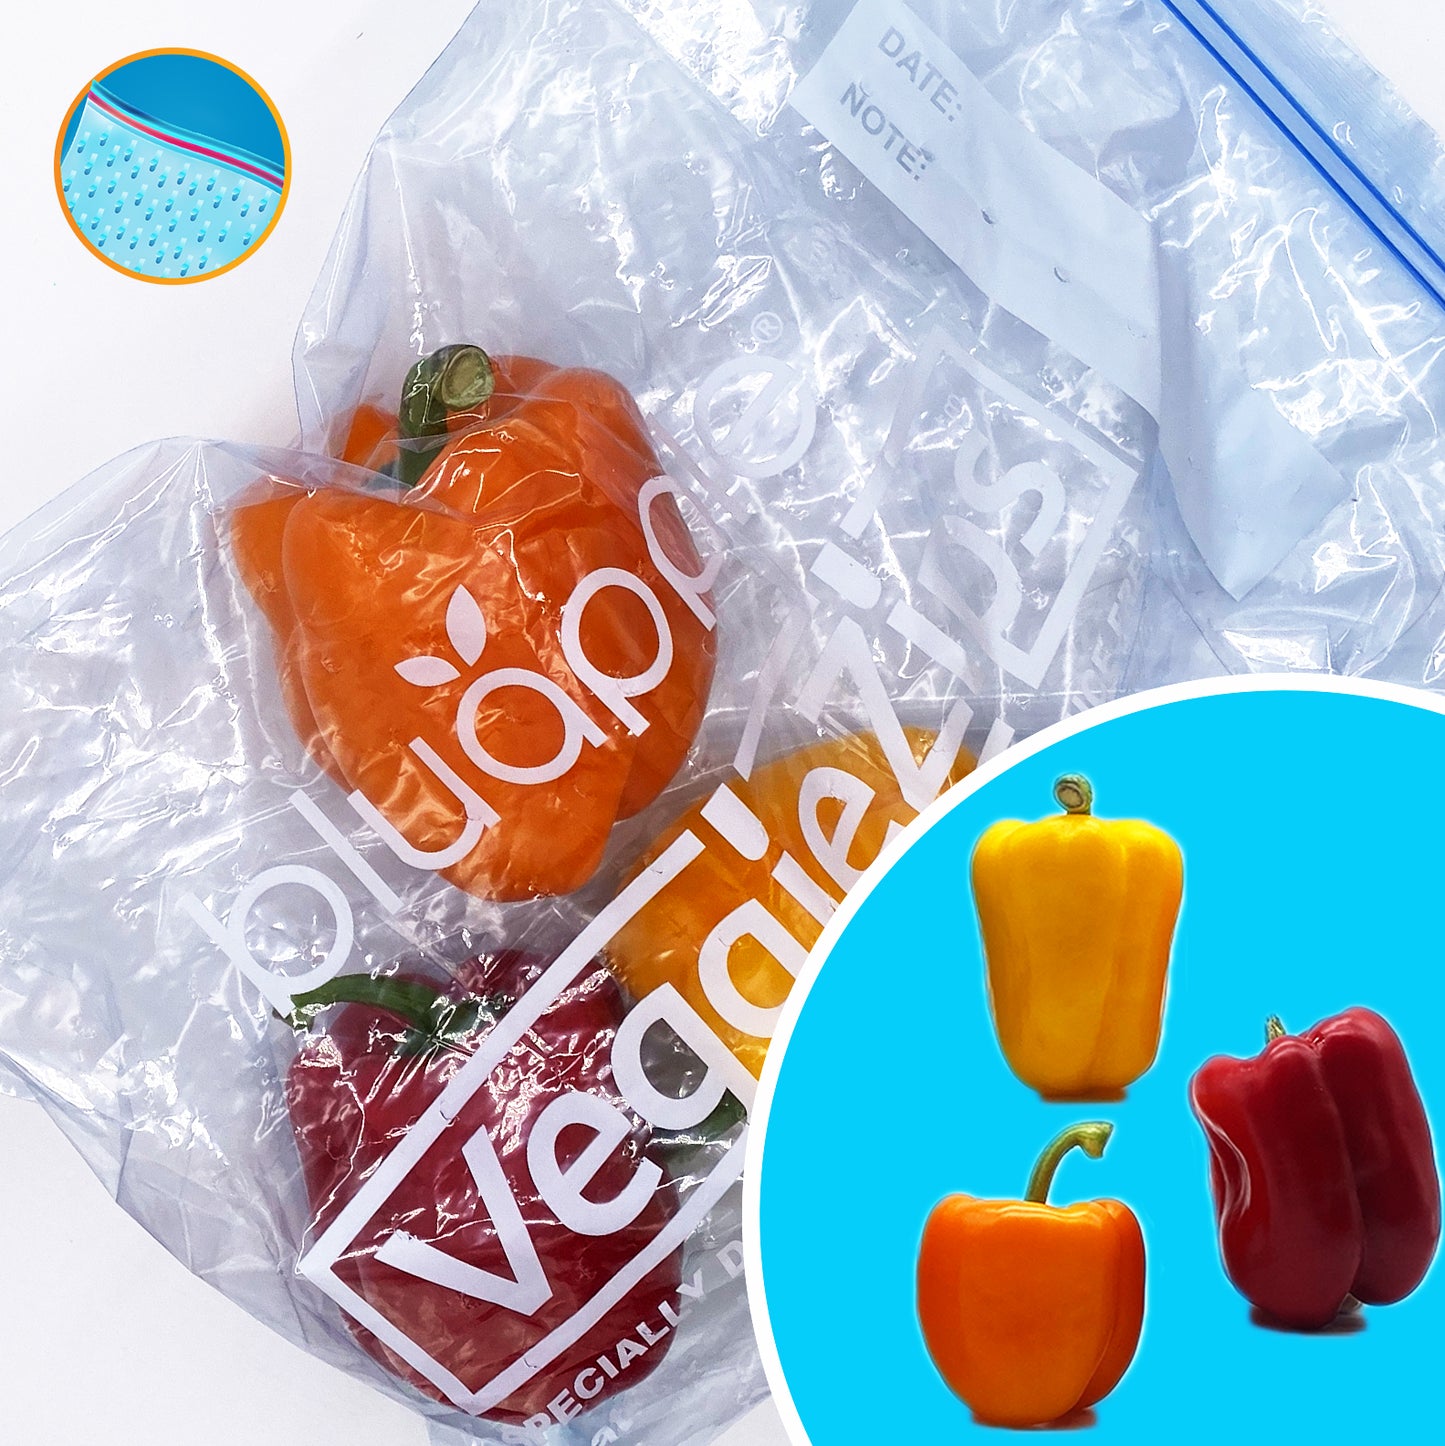 VeggieZips® with HydroLiners® 10-Pack